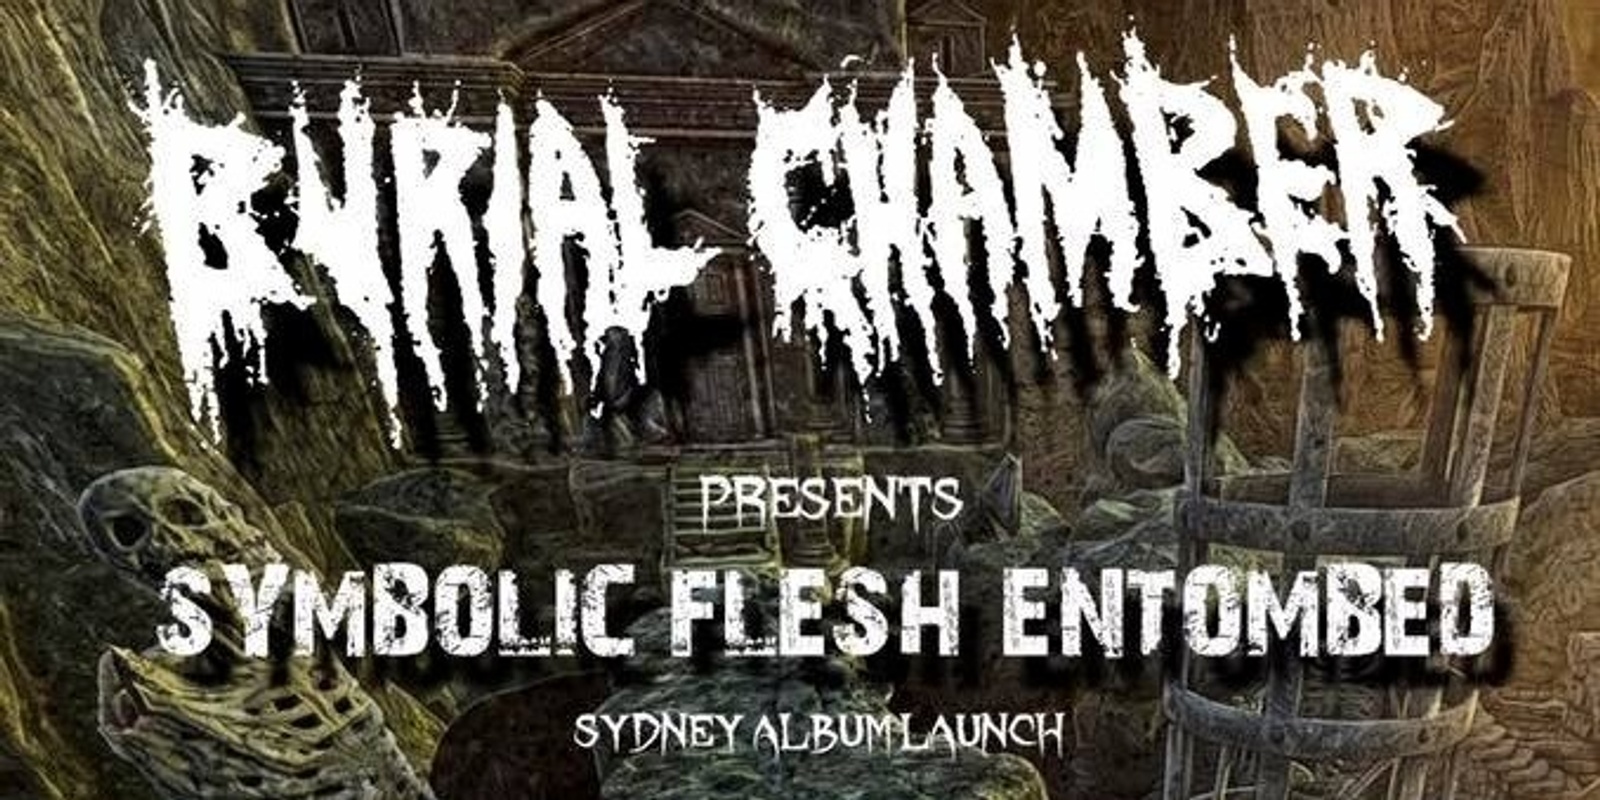 Banner image for Burial Chamber:  Symbolic Flesh Entombed Album Launch [SYD]